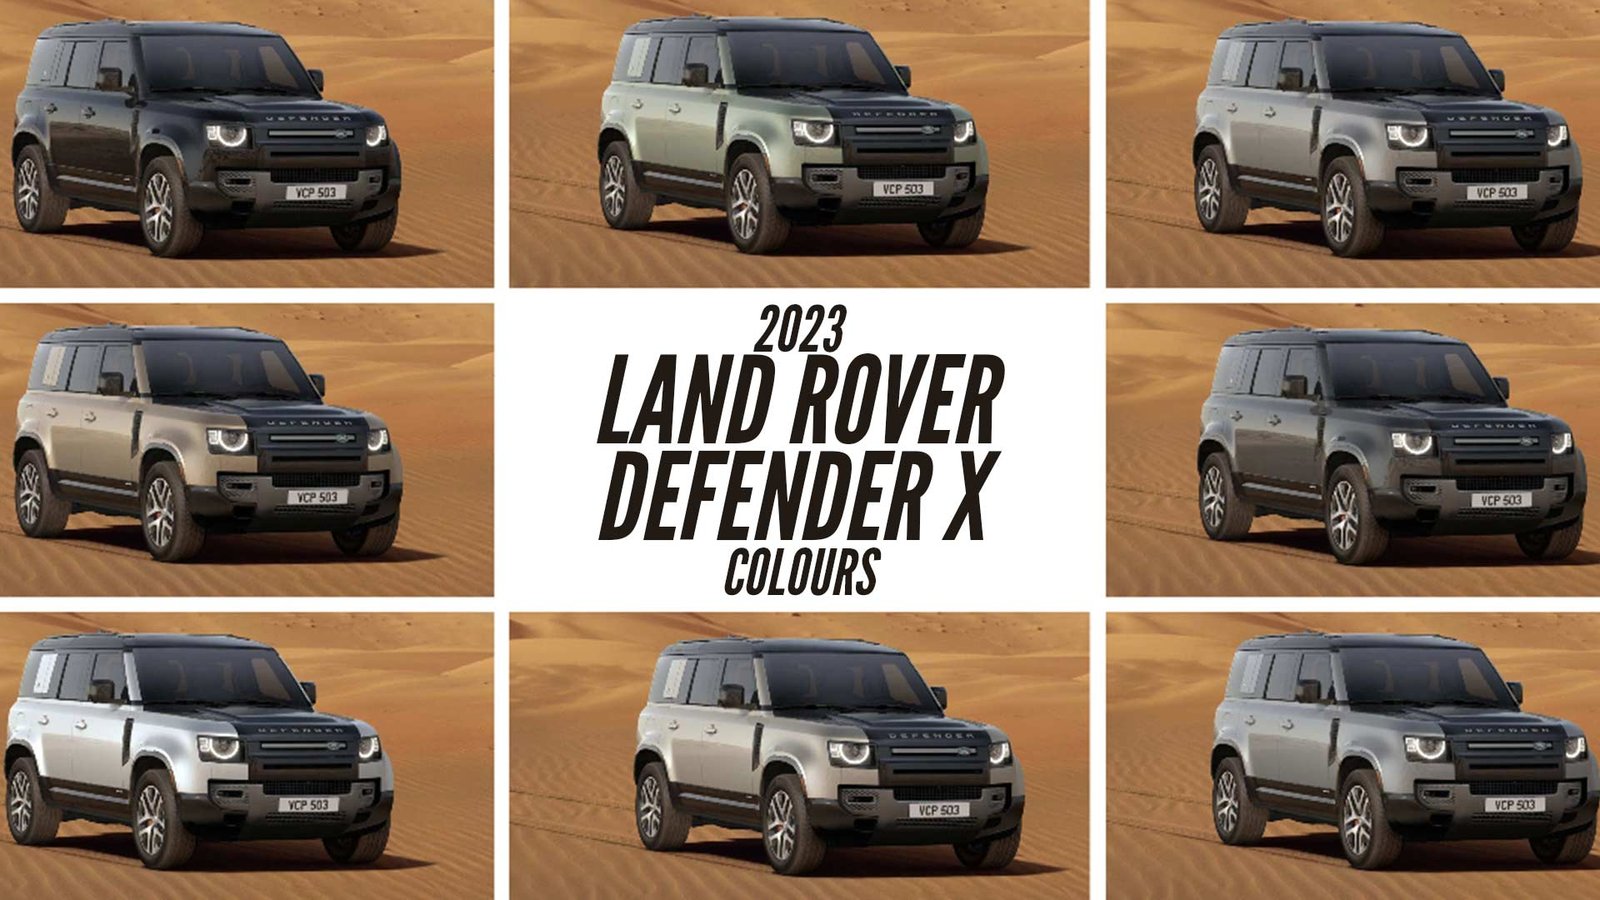 2023 Land Rover Defender X 110 4Door All Color Options Images